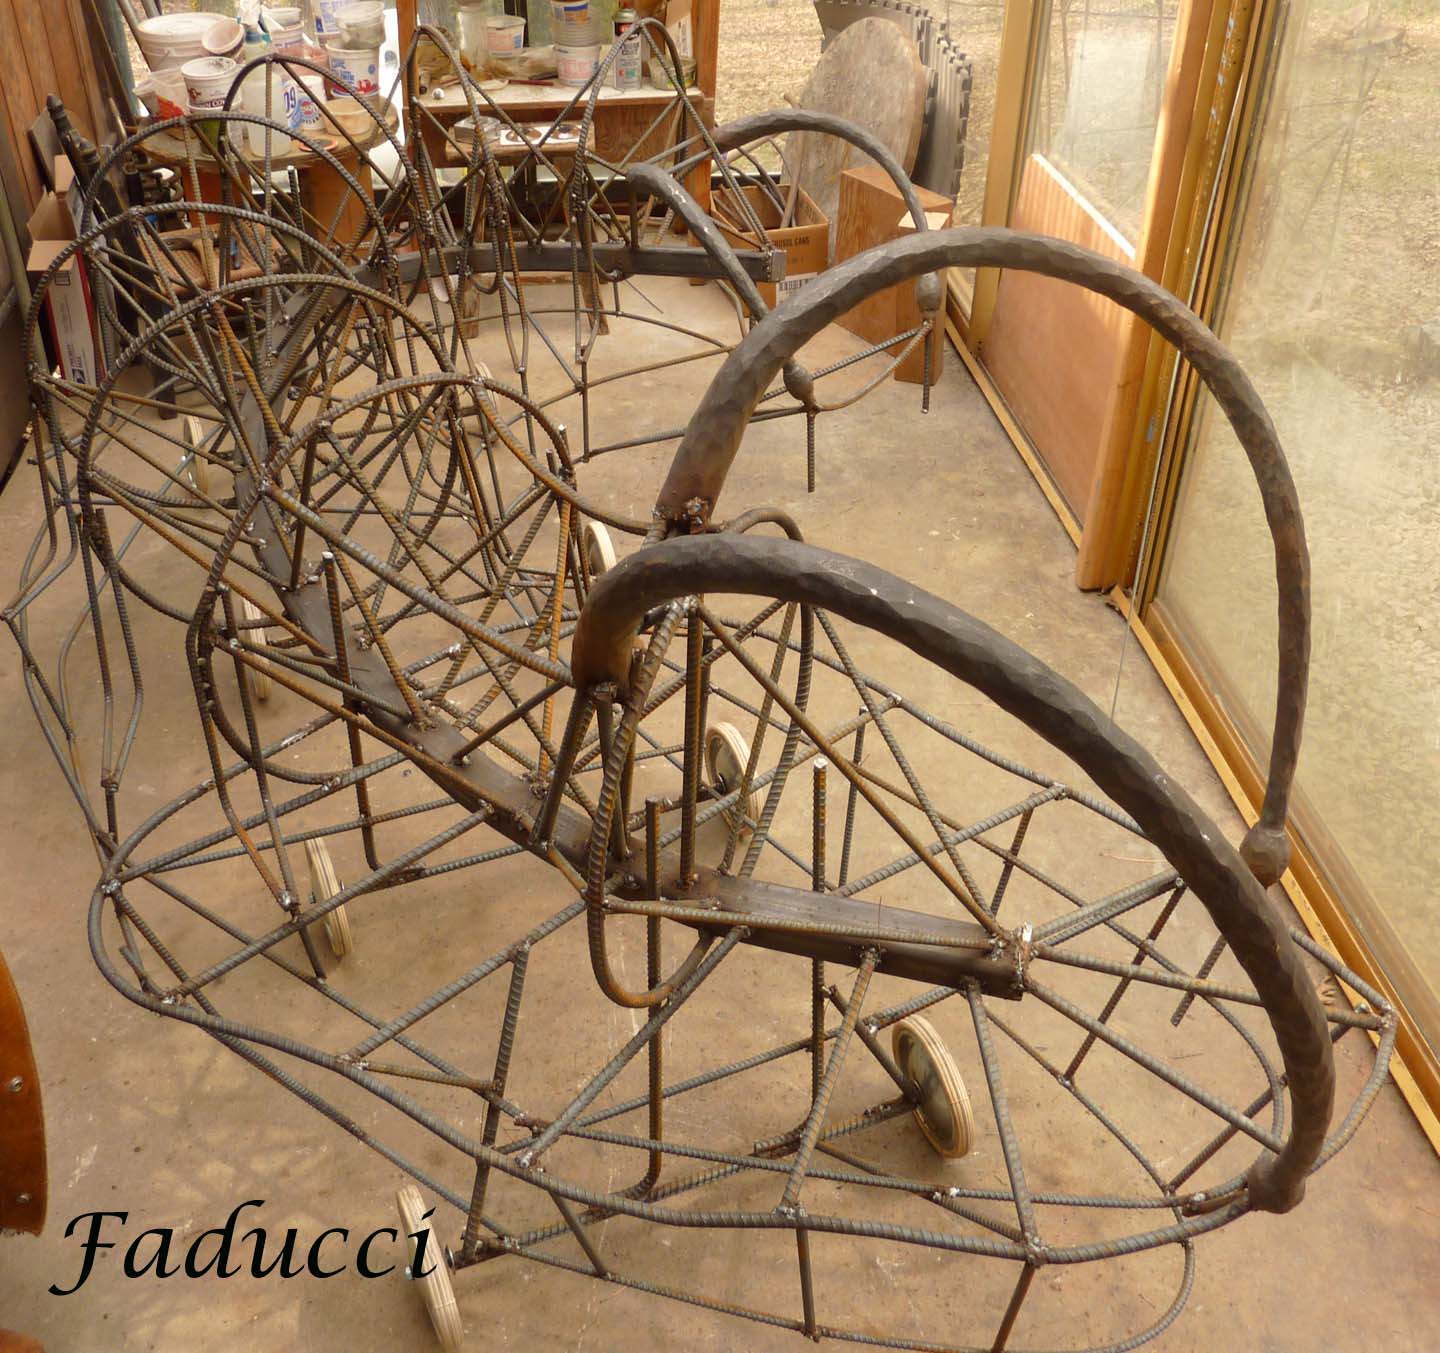 Faducci has started new CPG sculpture